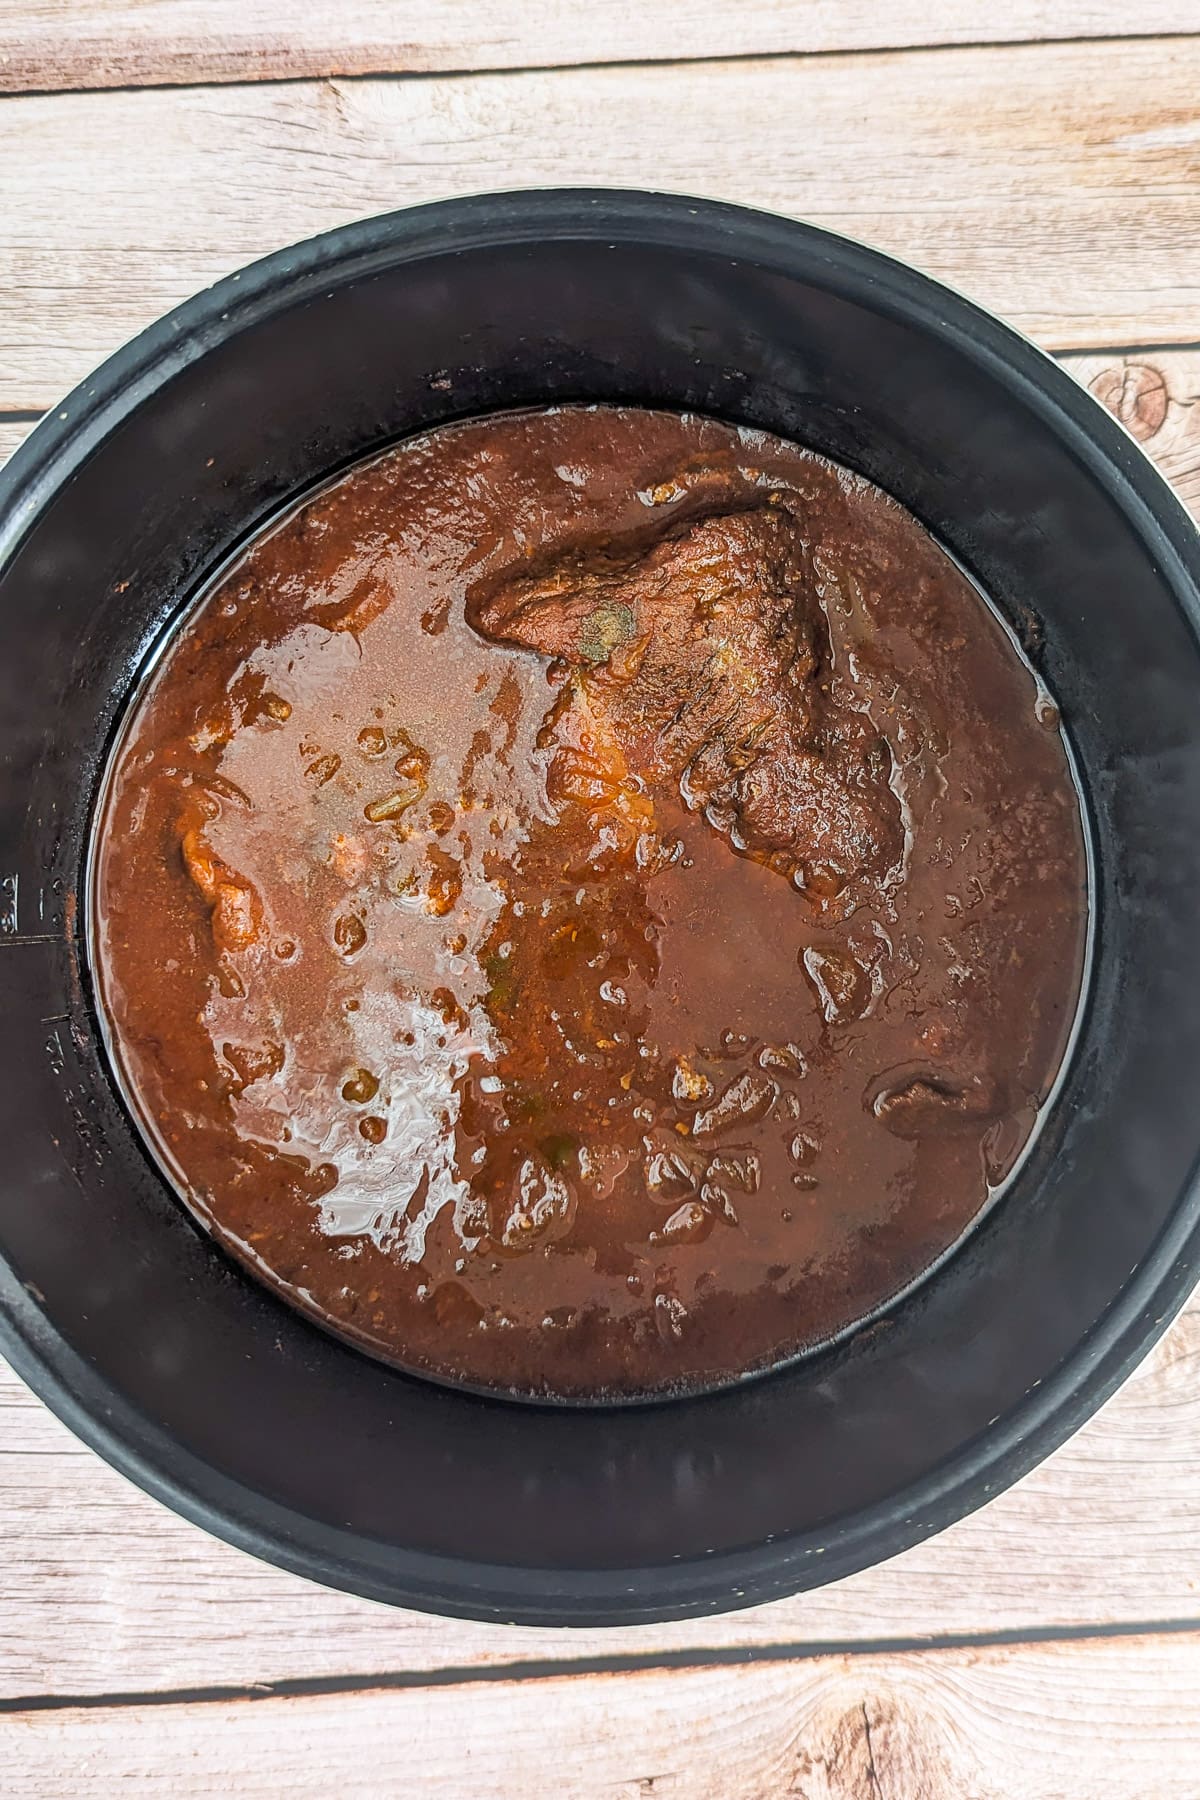 Cooked beef in slow cooker.